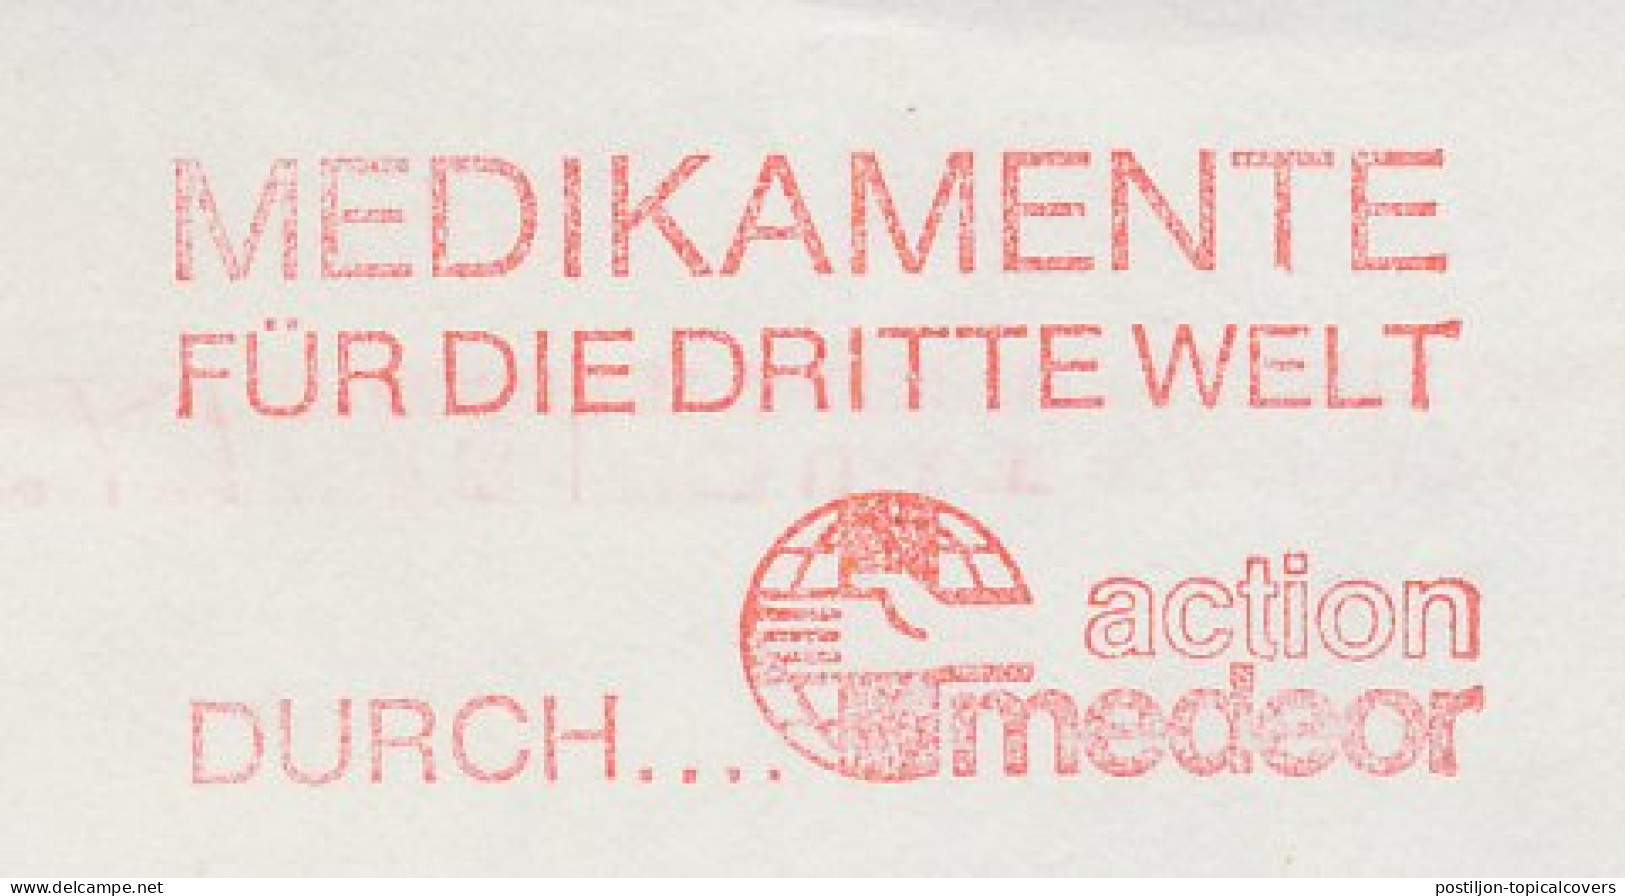 Meter Cut Germany Medicine For The Third World - Pharmacy